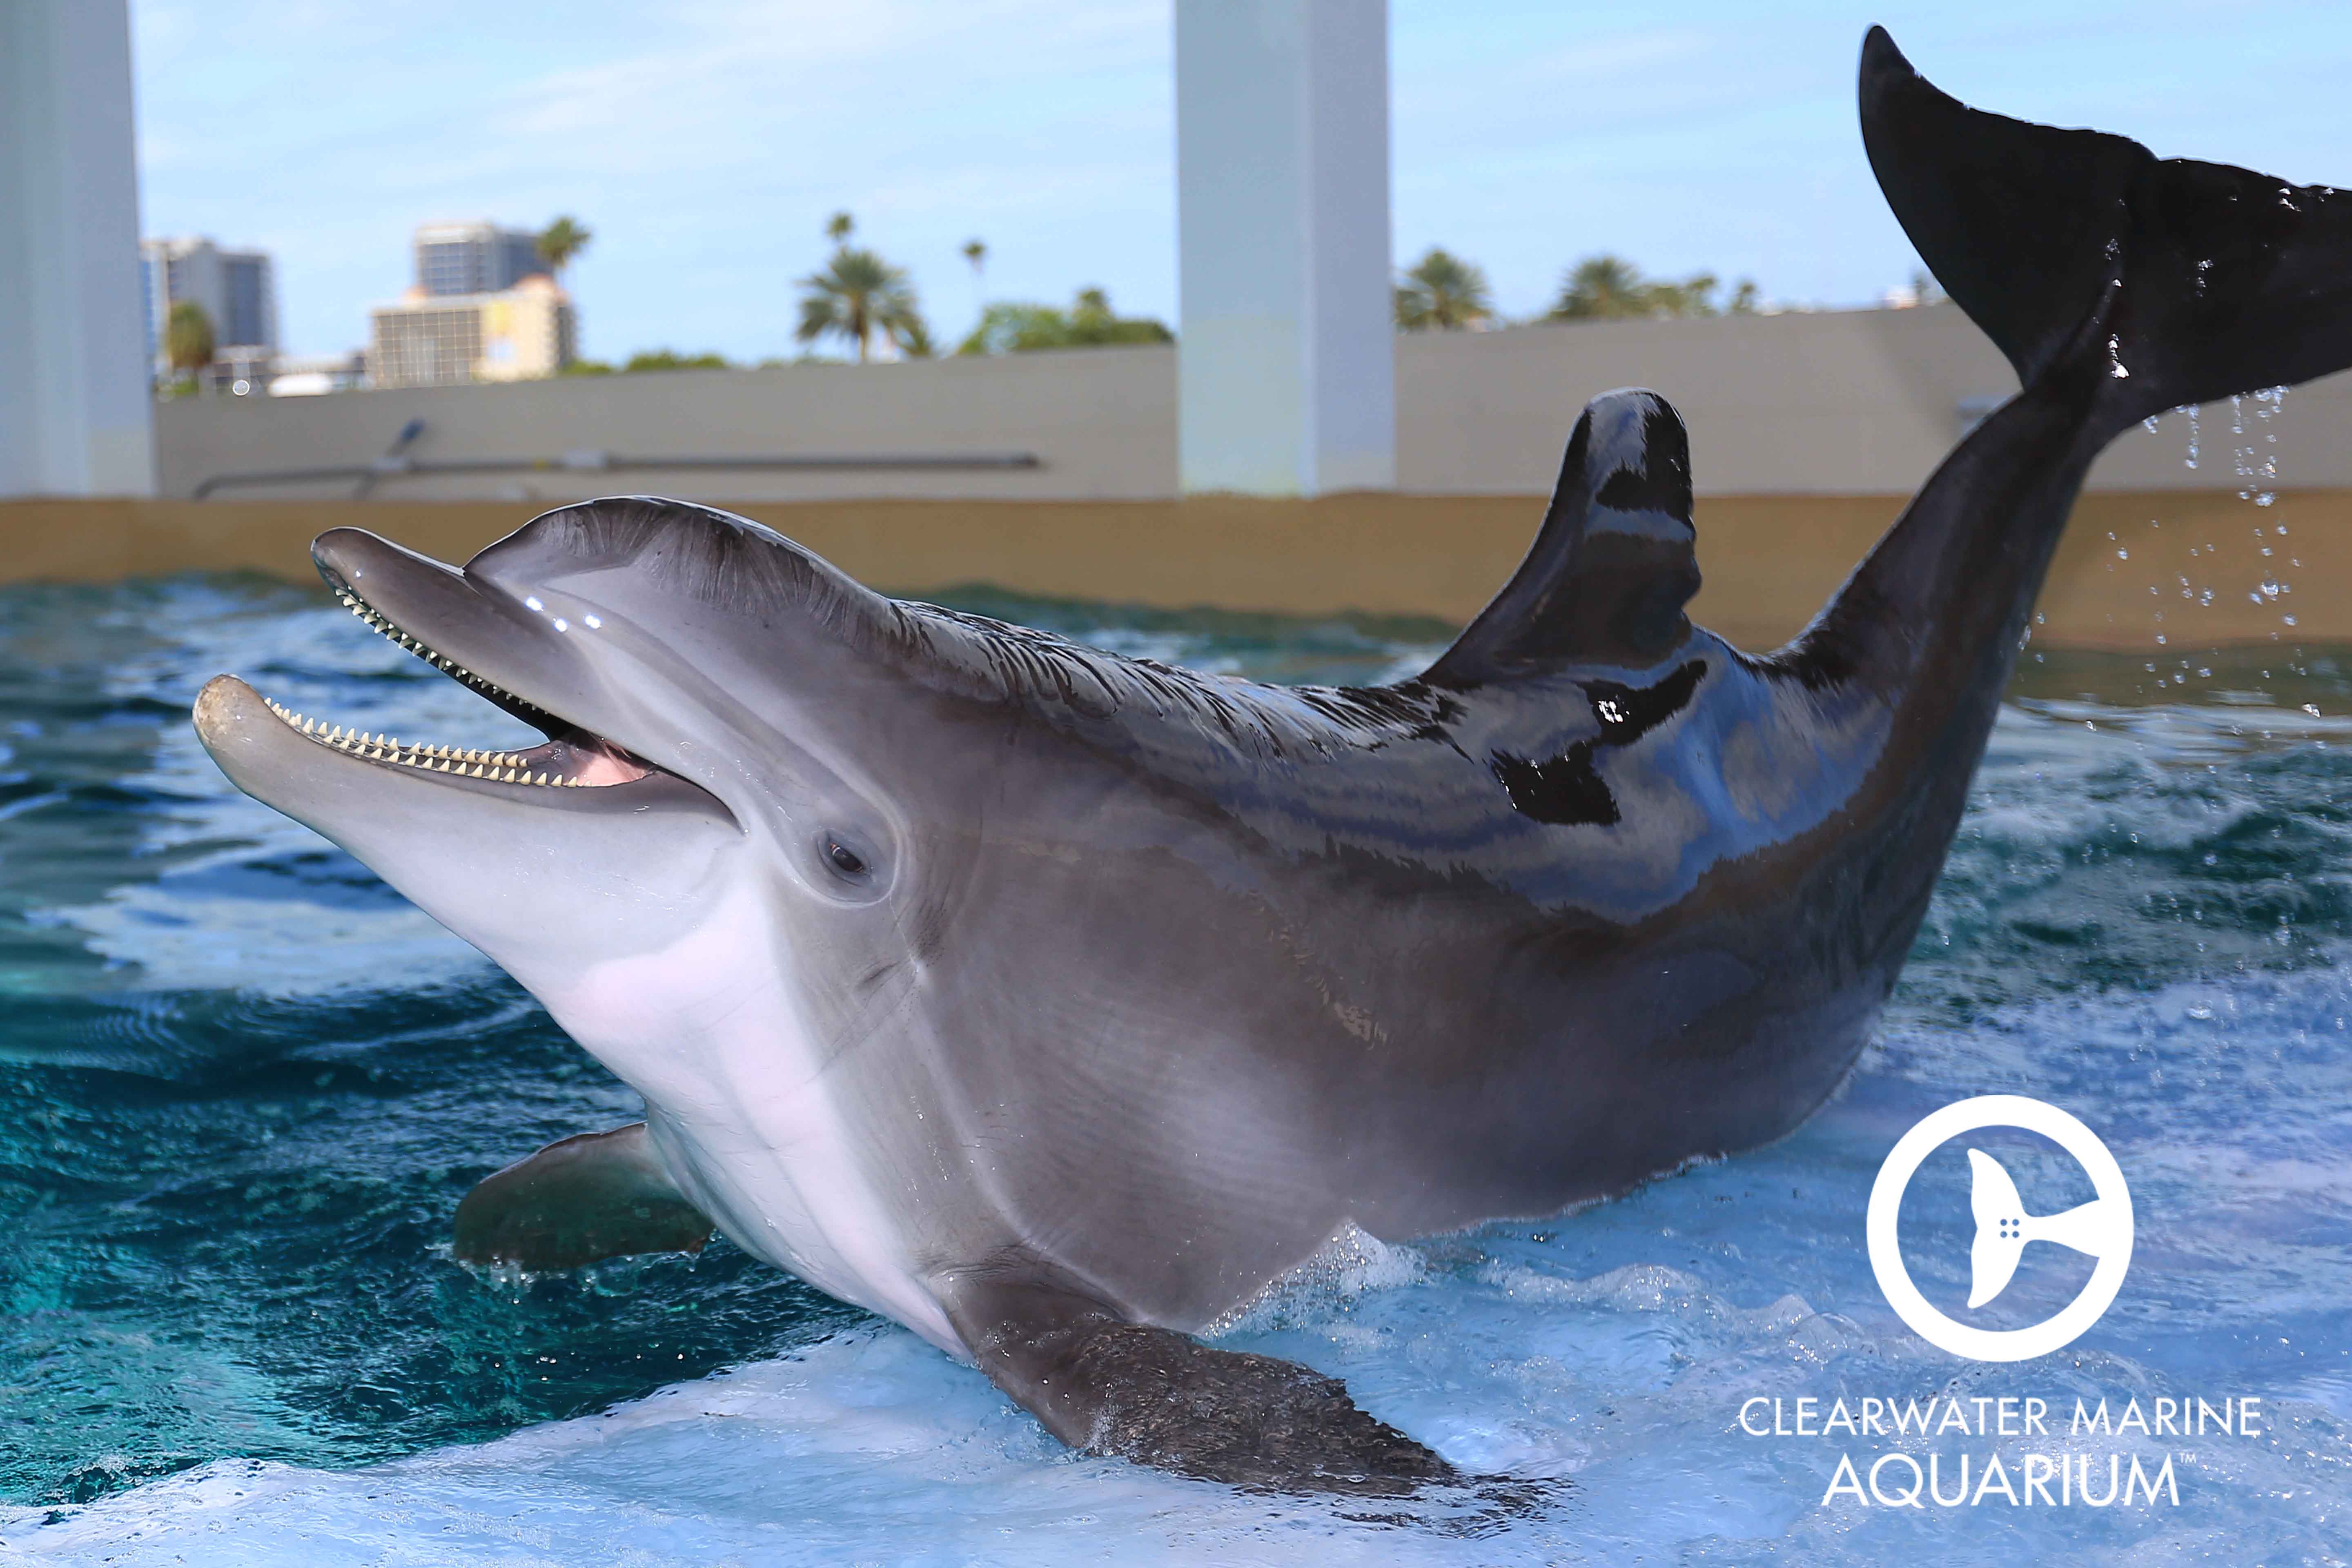 Clearwater Marine Aquarium home of Winter and Hope